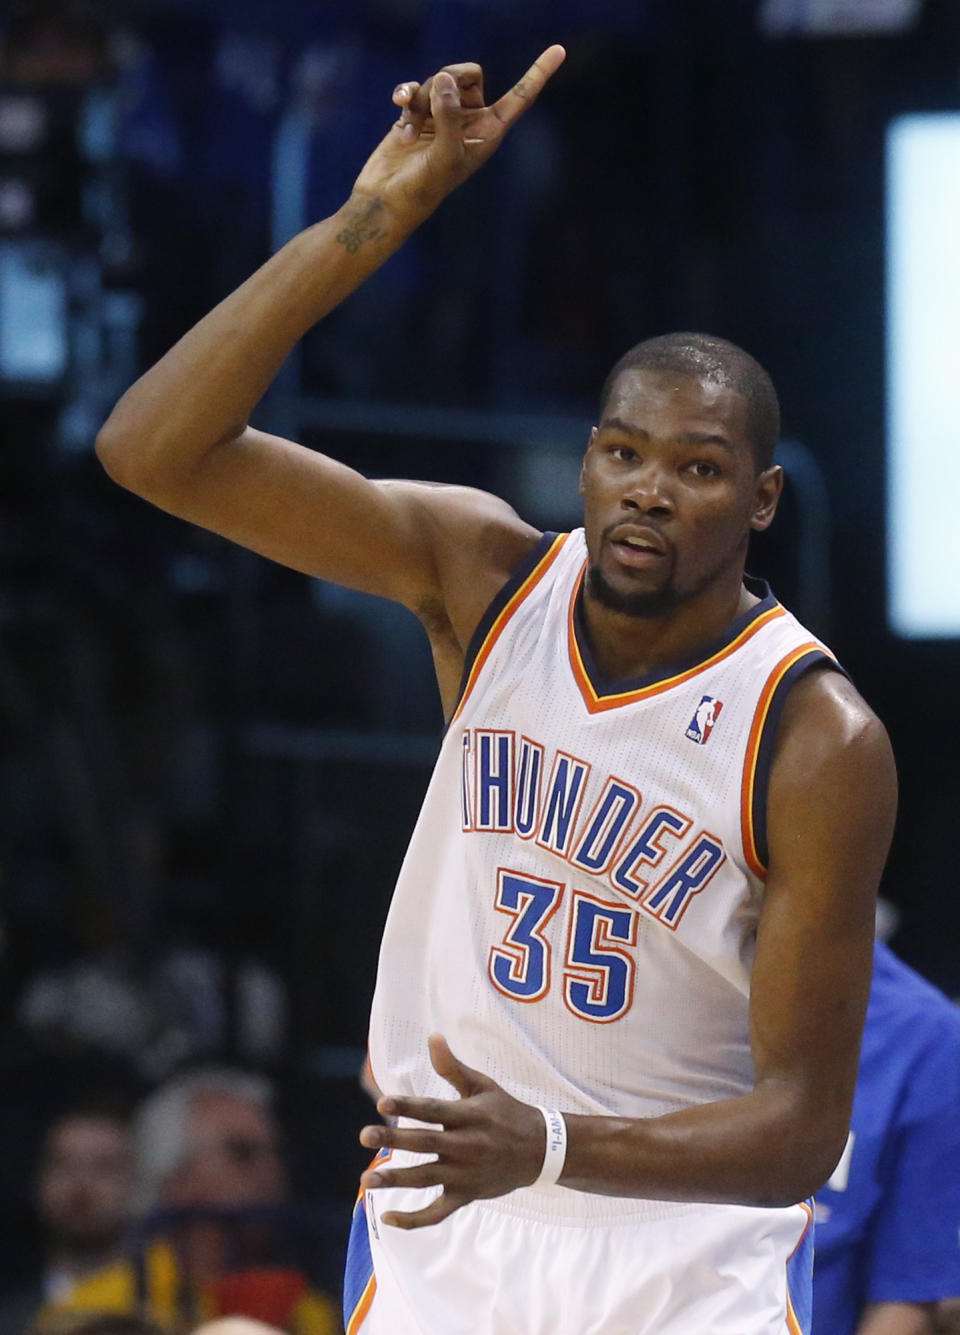 Oklahoma City Thunder forward Kevin Durant (35) gestures after hitting a three-point basket in the first quarter of Game 2 of the Western Conference semifinal NBA basketball playoff series against the Los Angeles Clippers in Oklahoma City, Wednesday, May 7, 2014. (AP Photo/Sue Ogrocki)